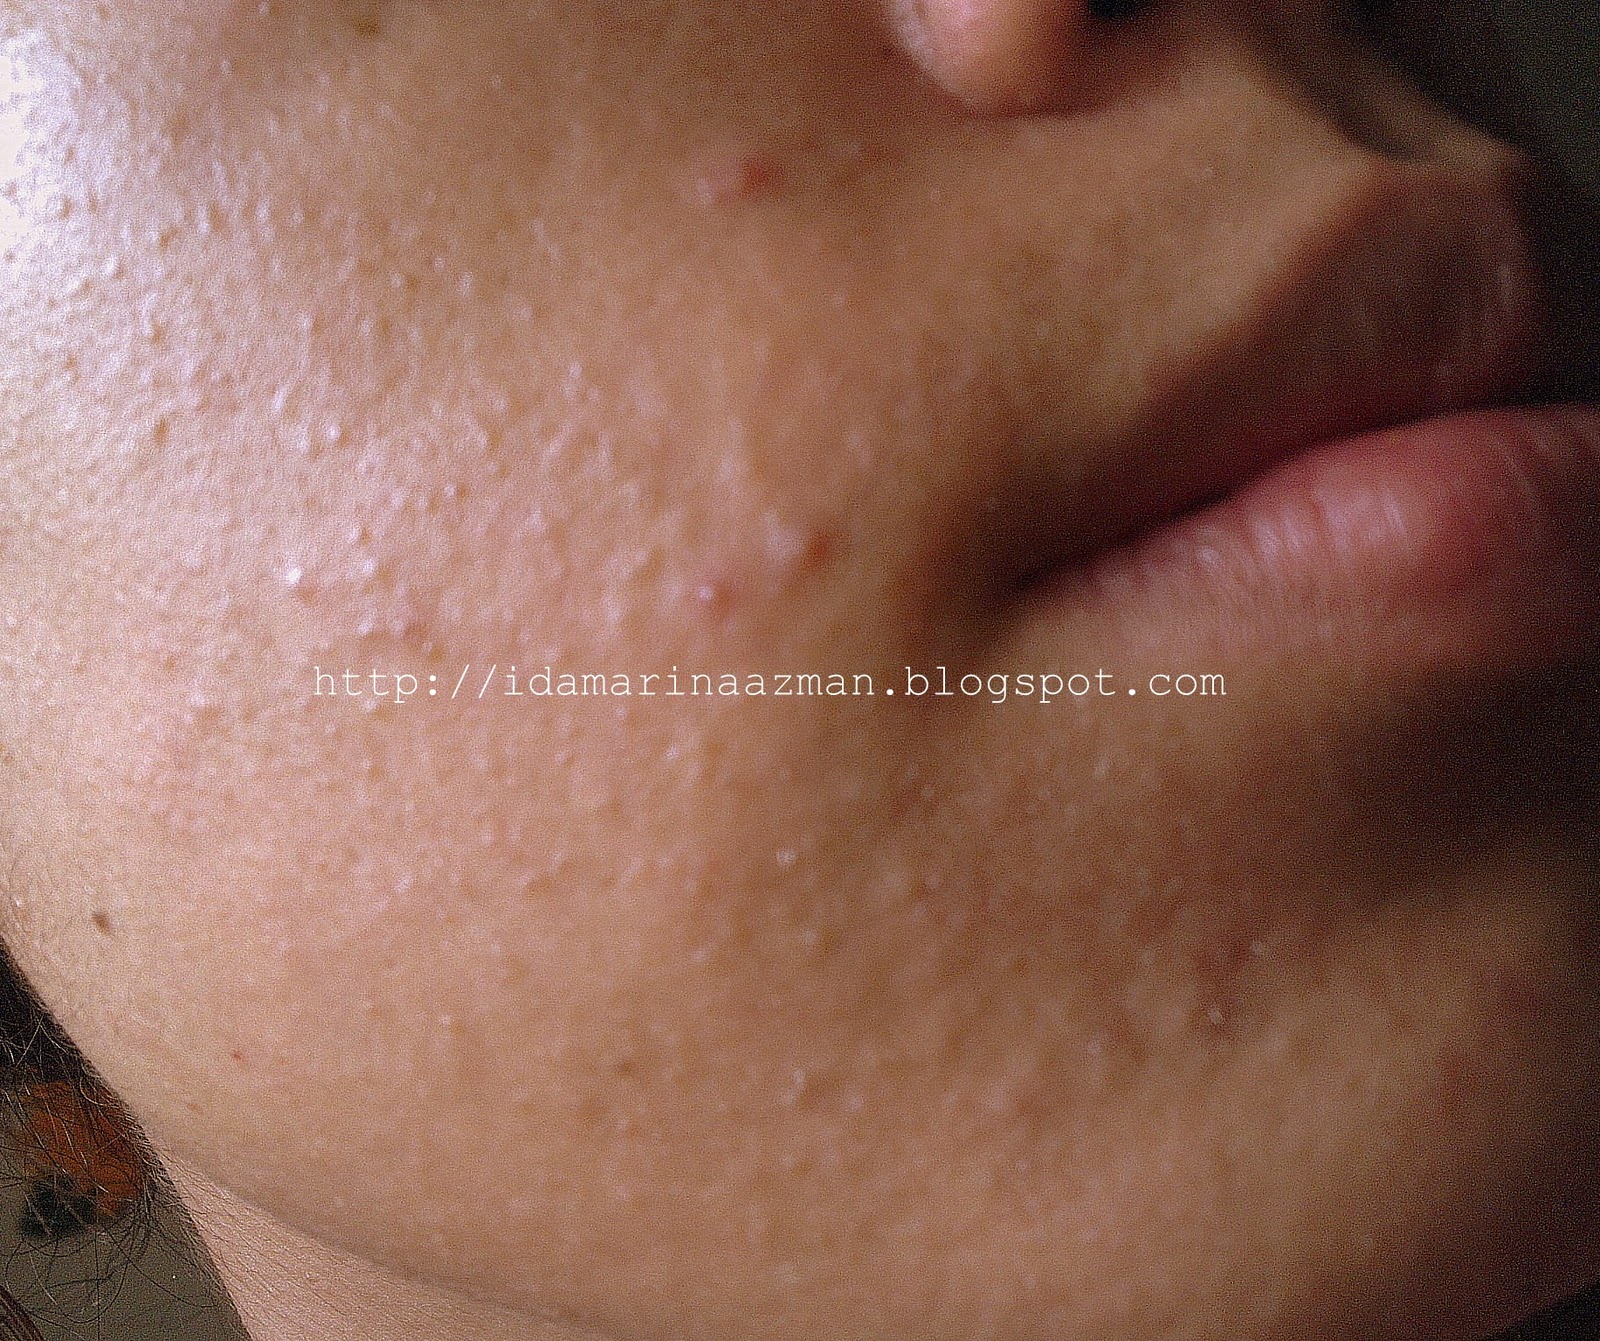 acne how to get rid of